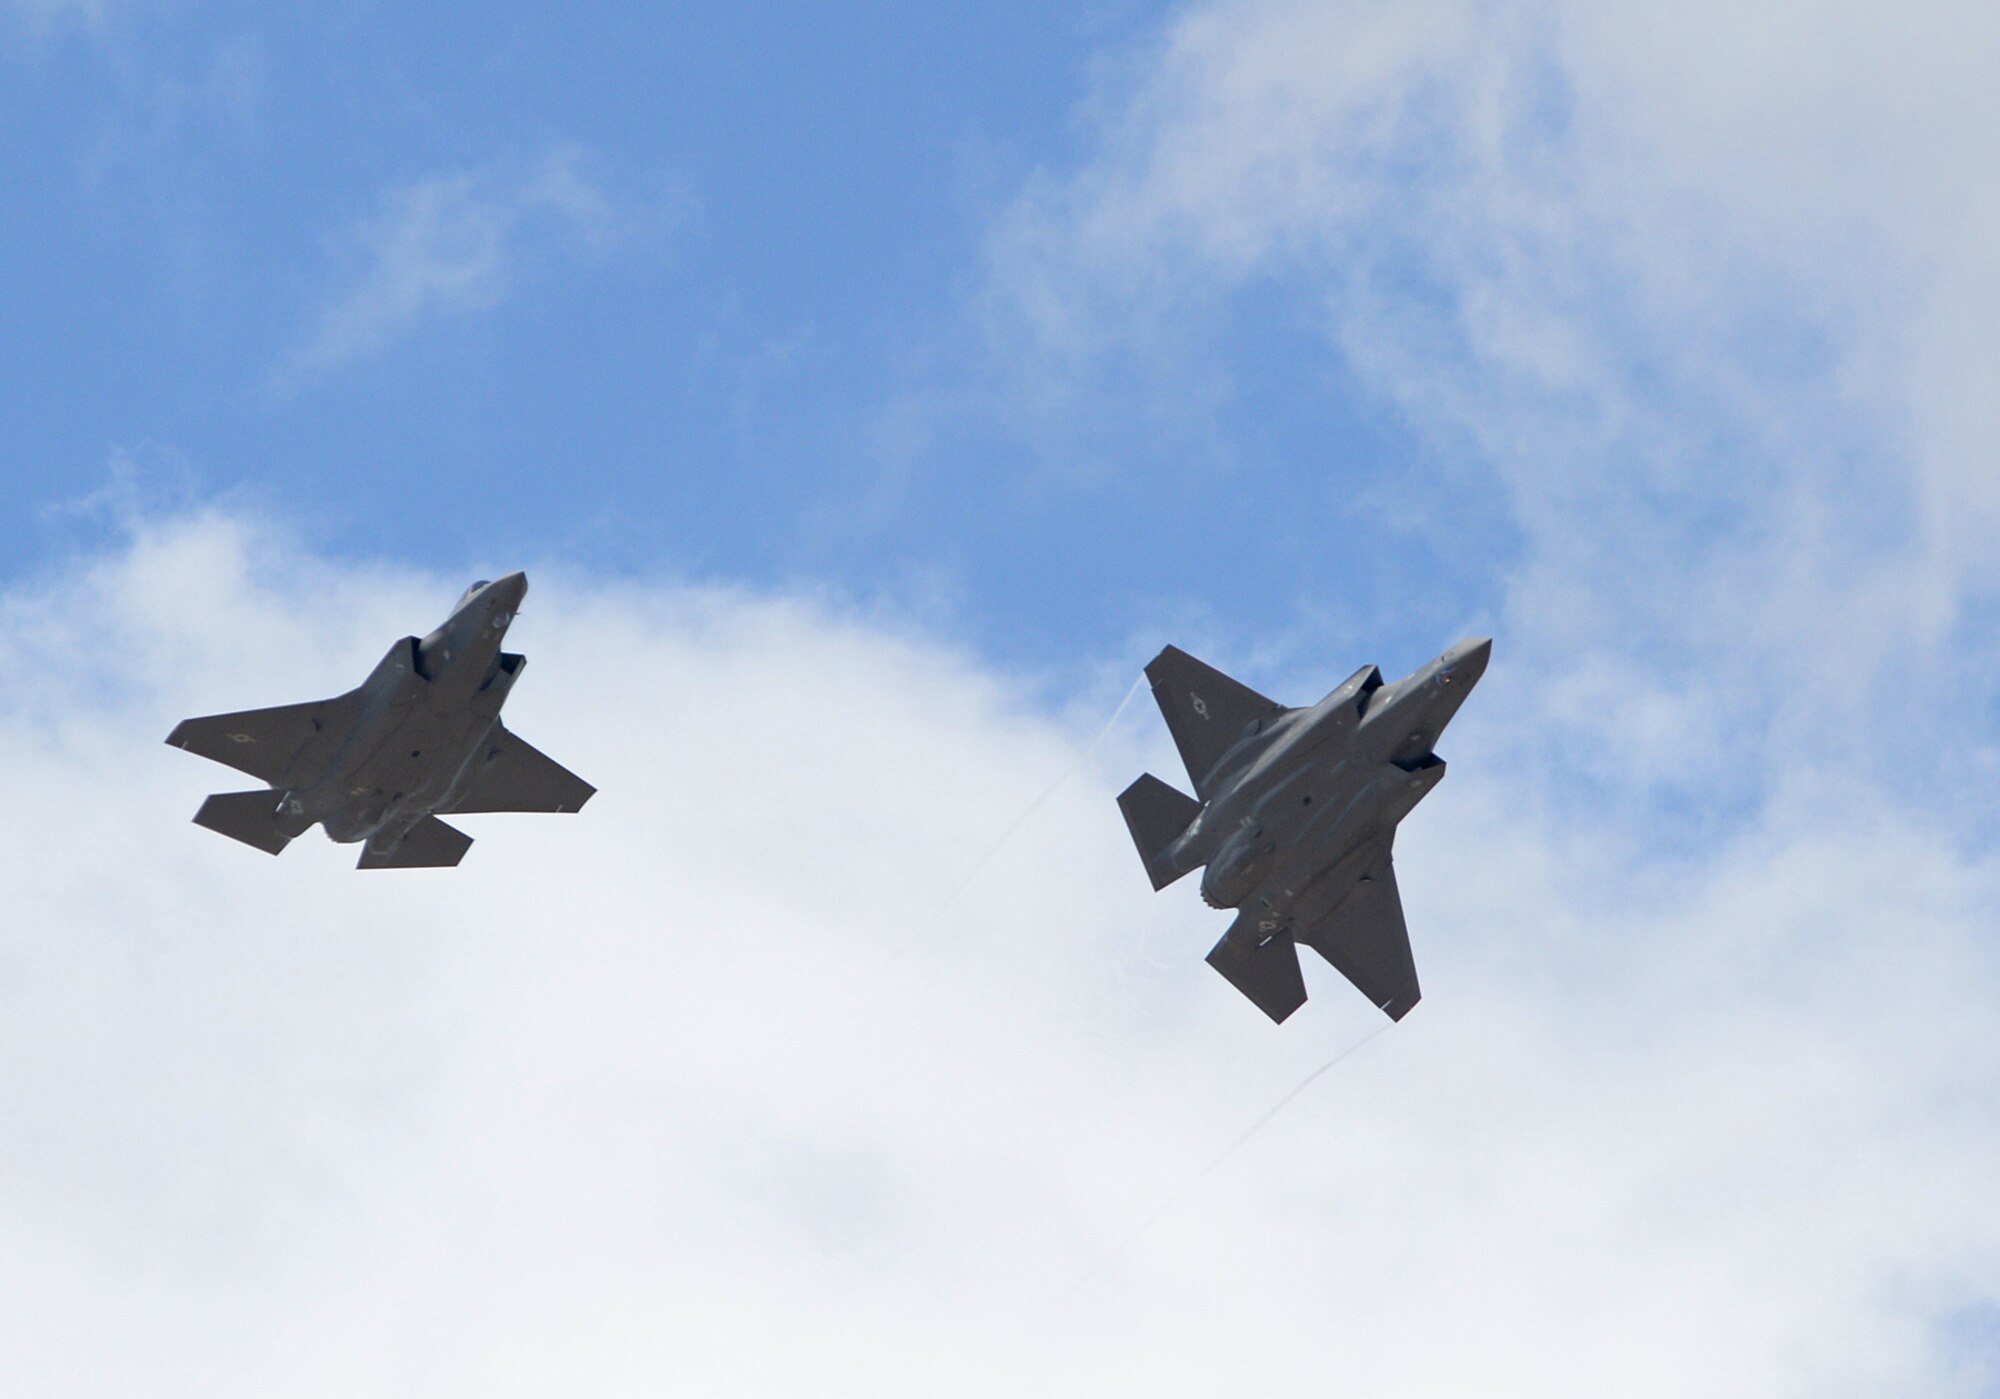 The first two operational F-35A Lightning II aircraft arrive at Hill Air Force Base, Utah, Sept. 2, 2015.